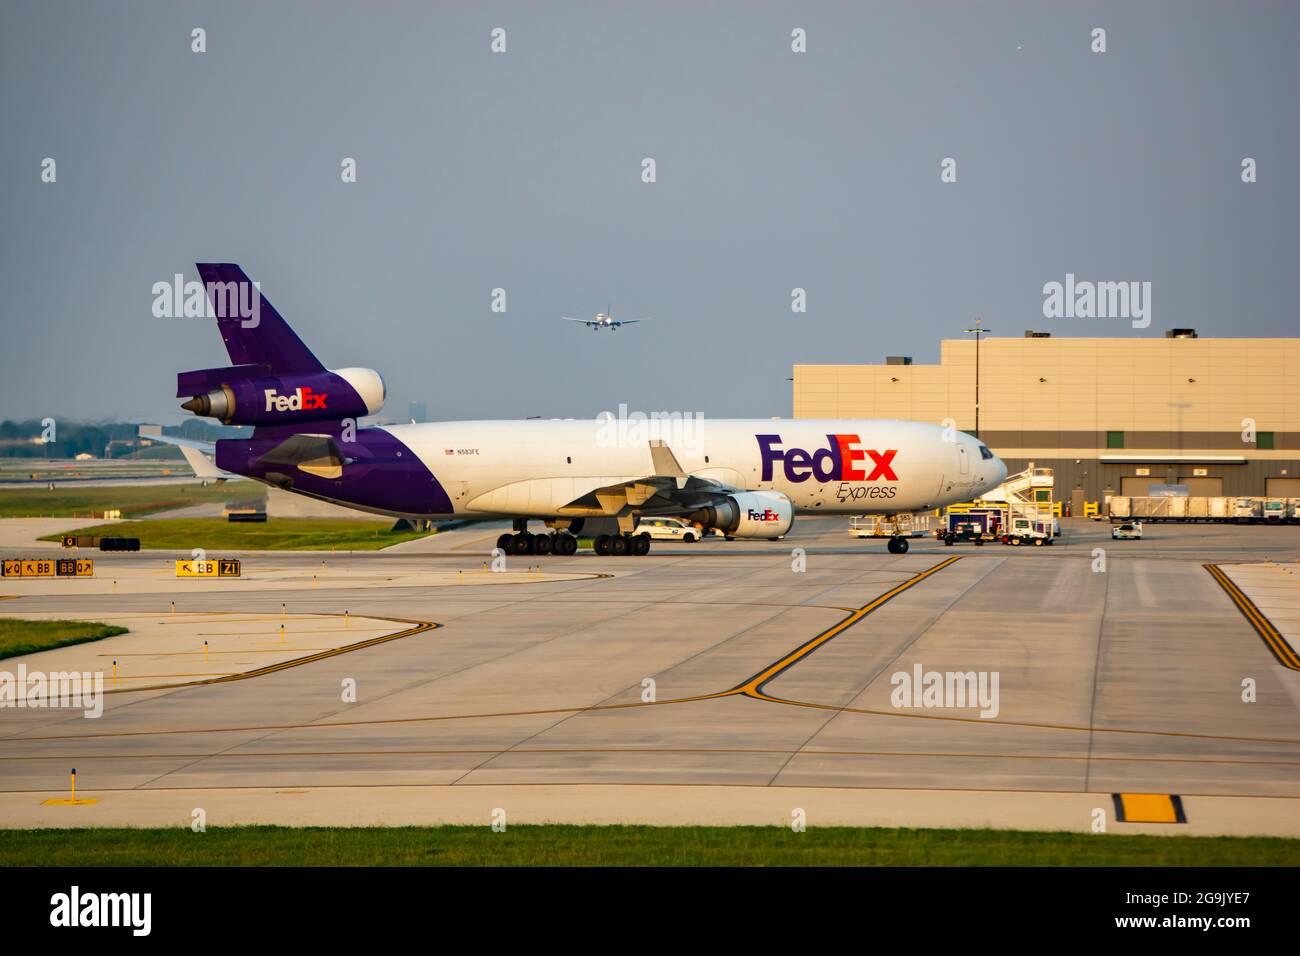 Chicago, IL, United States - July 25, 2021: FedEx Express McDonnell MD-11F (tail number N583FE) tri-jet taxiing at Chicago O'Hare International Airpor Stock Photo